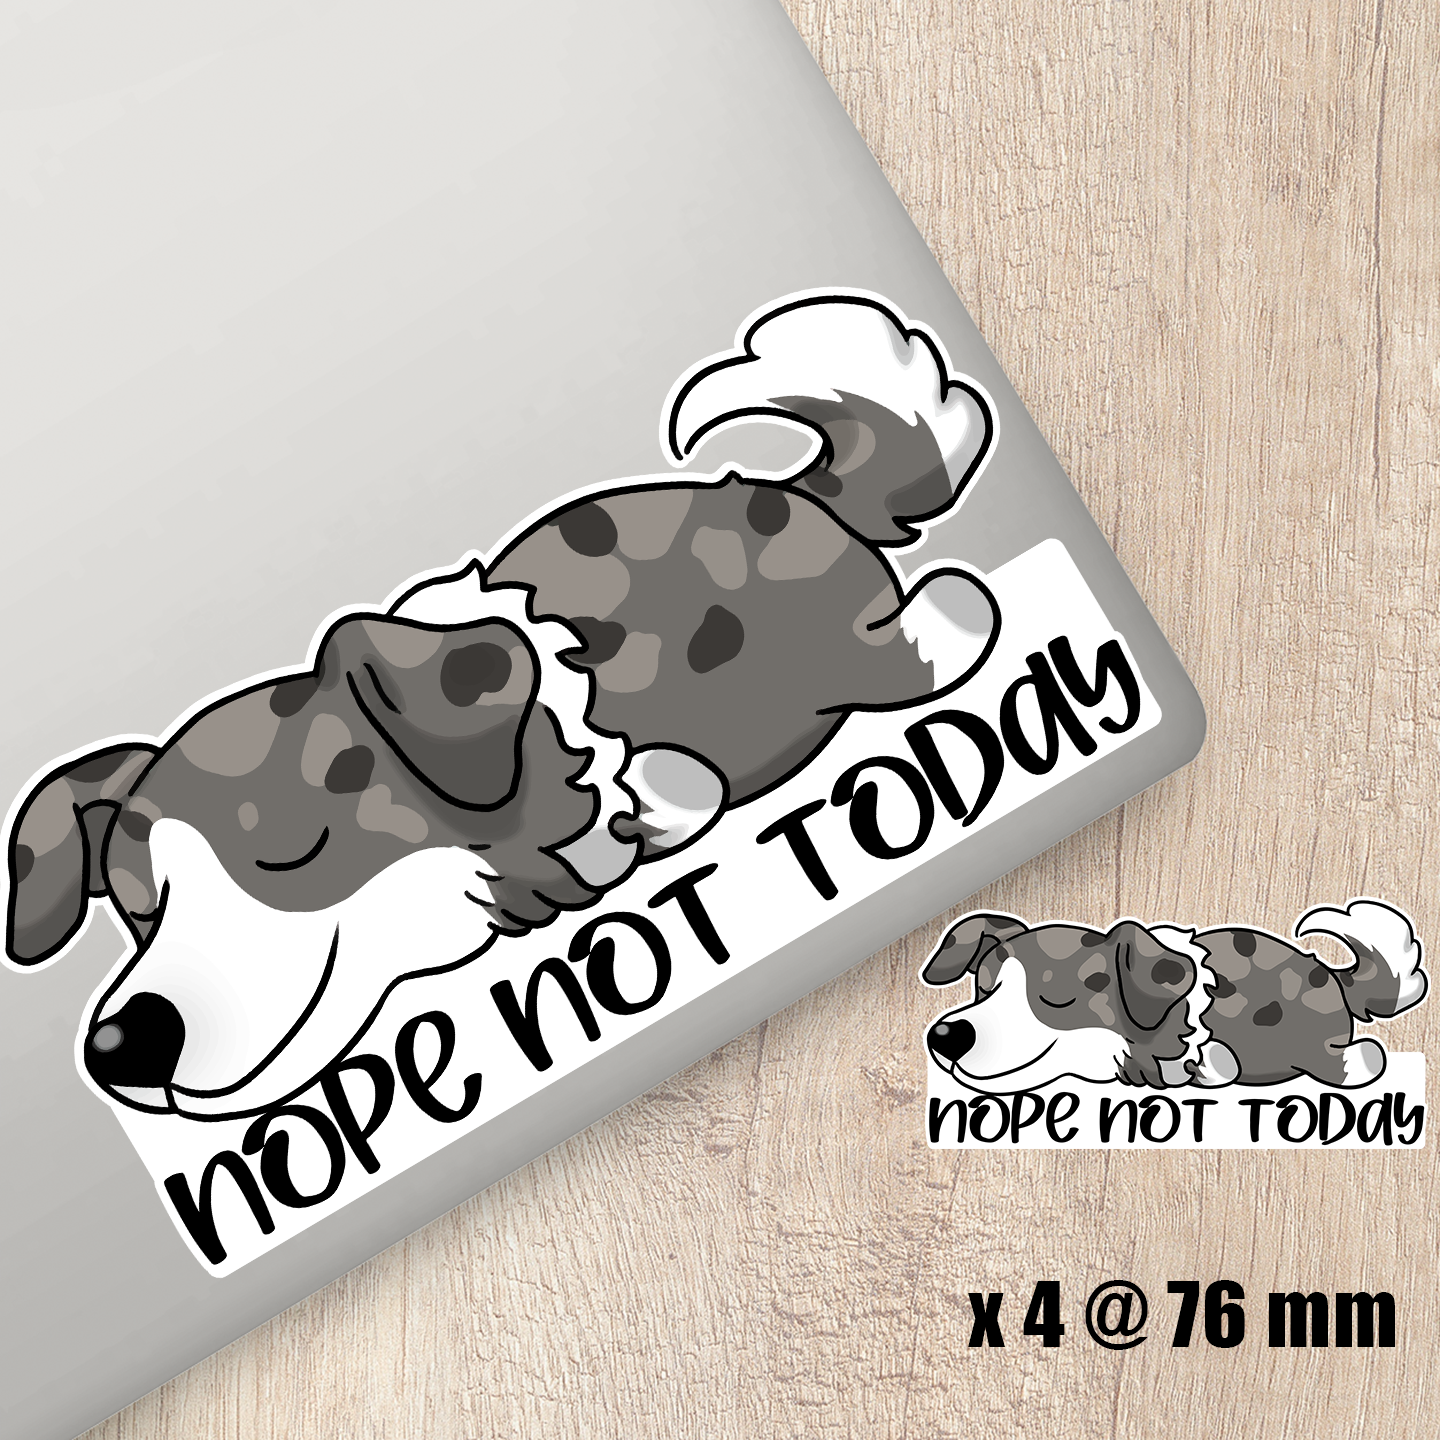 Merle Border Collie Nope Not Today Sticker